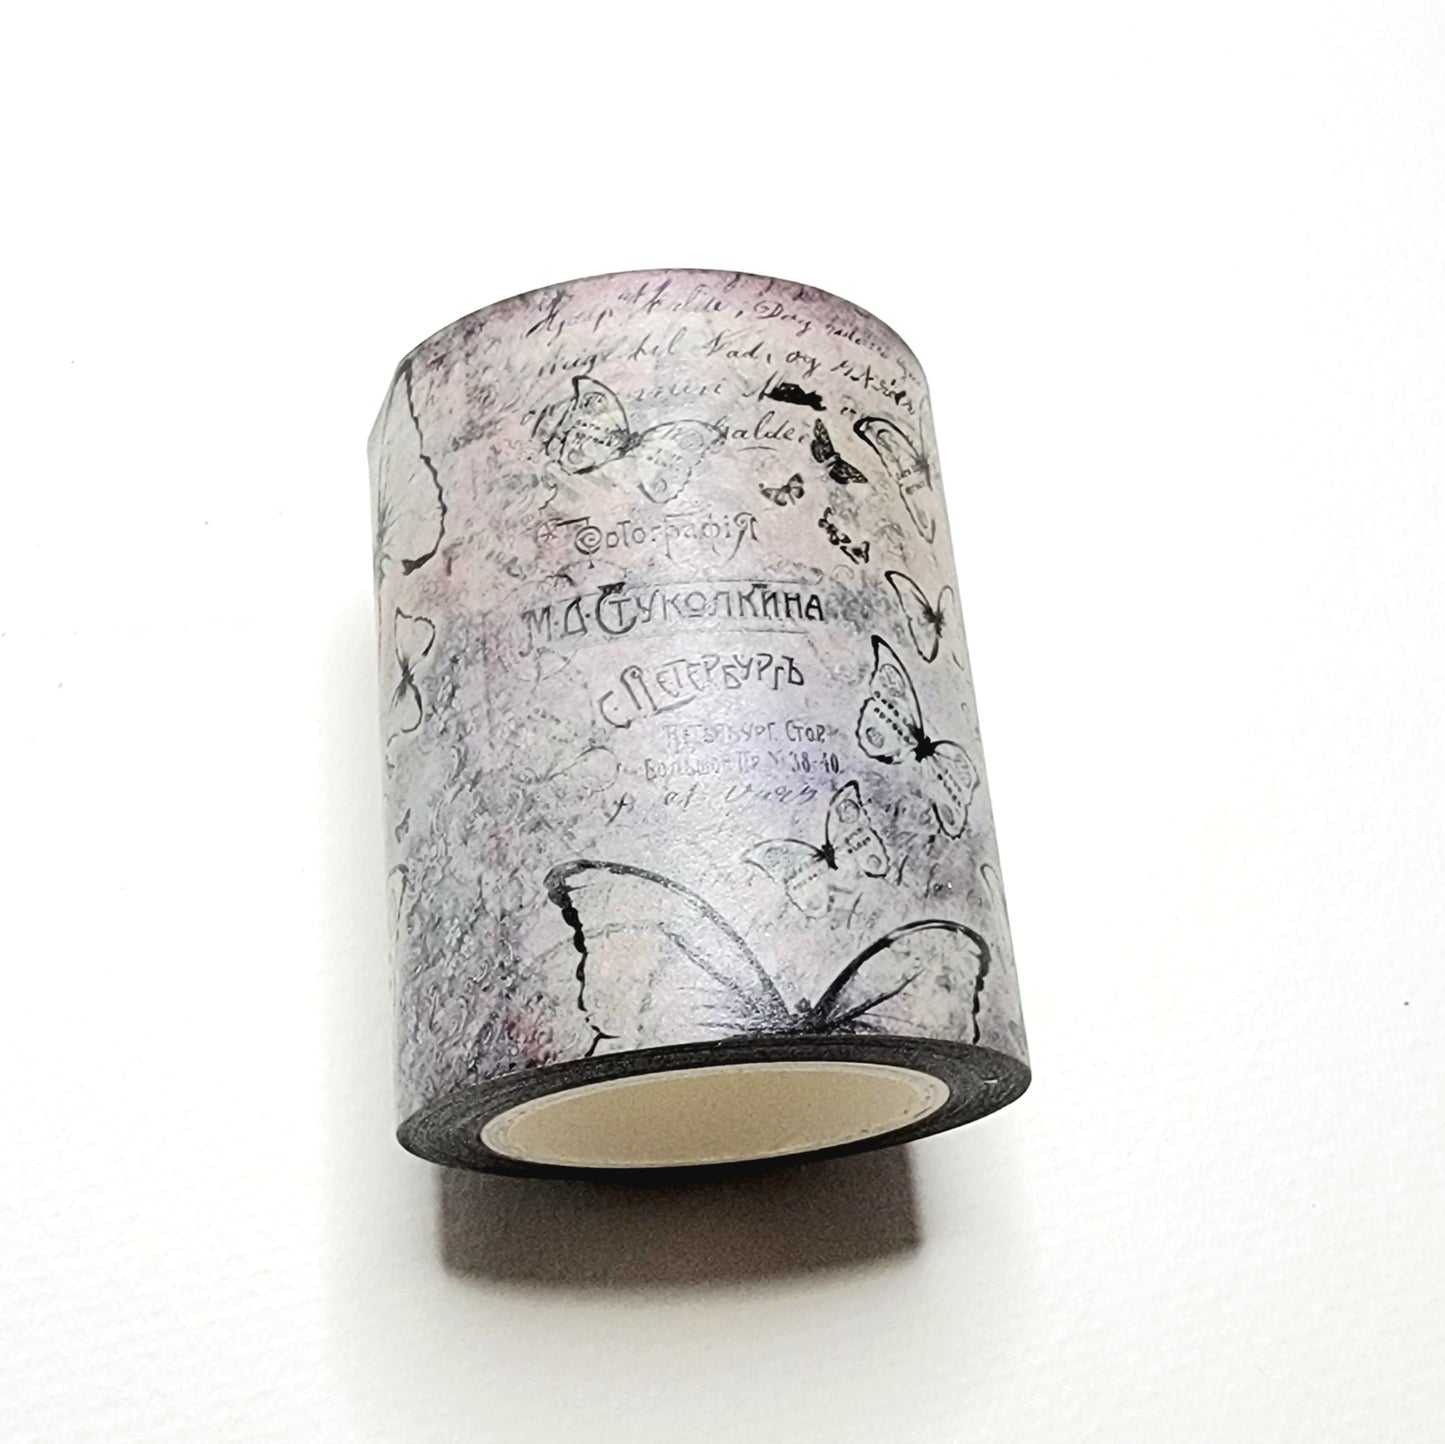 Spread Your Wings Butterfly Washi Tape, 2 Inch Wide Tape by Finnabair